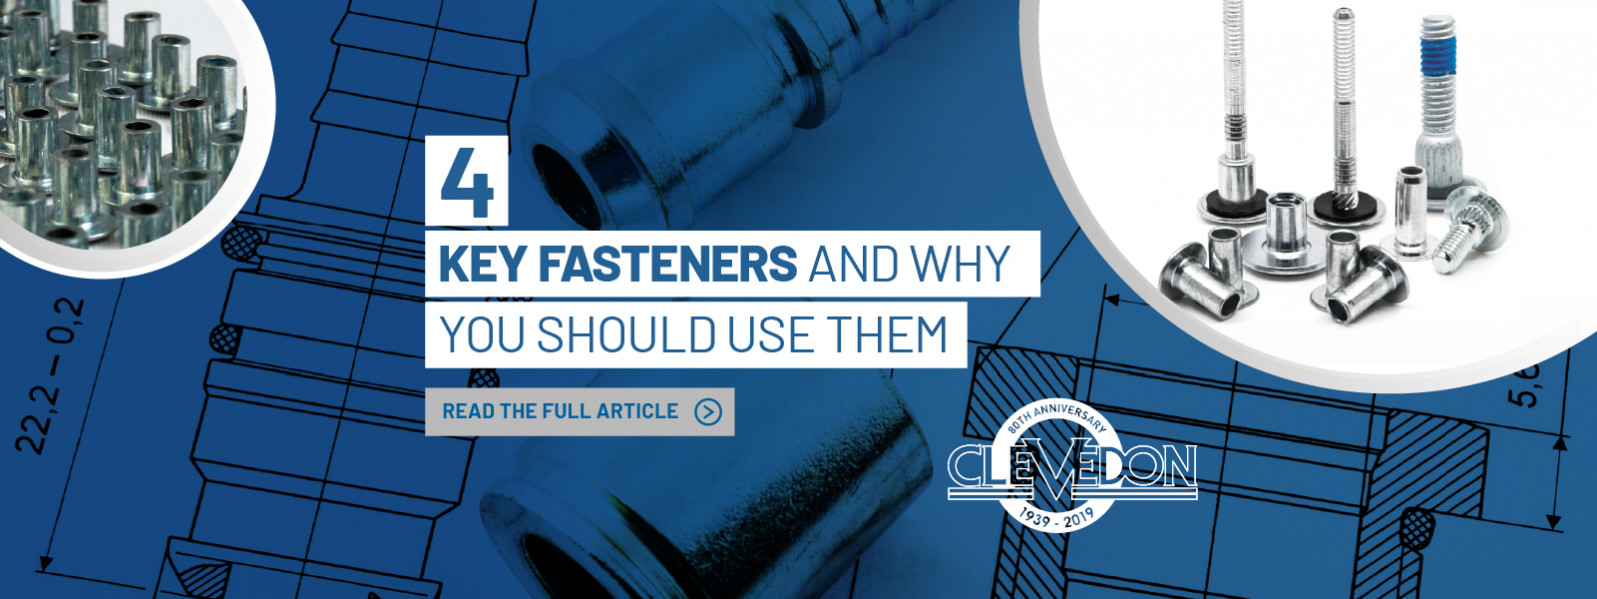 4 Key Fasteners and Why You Should Use Them